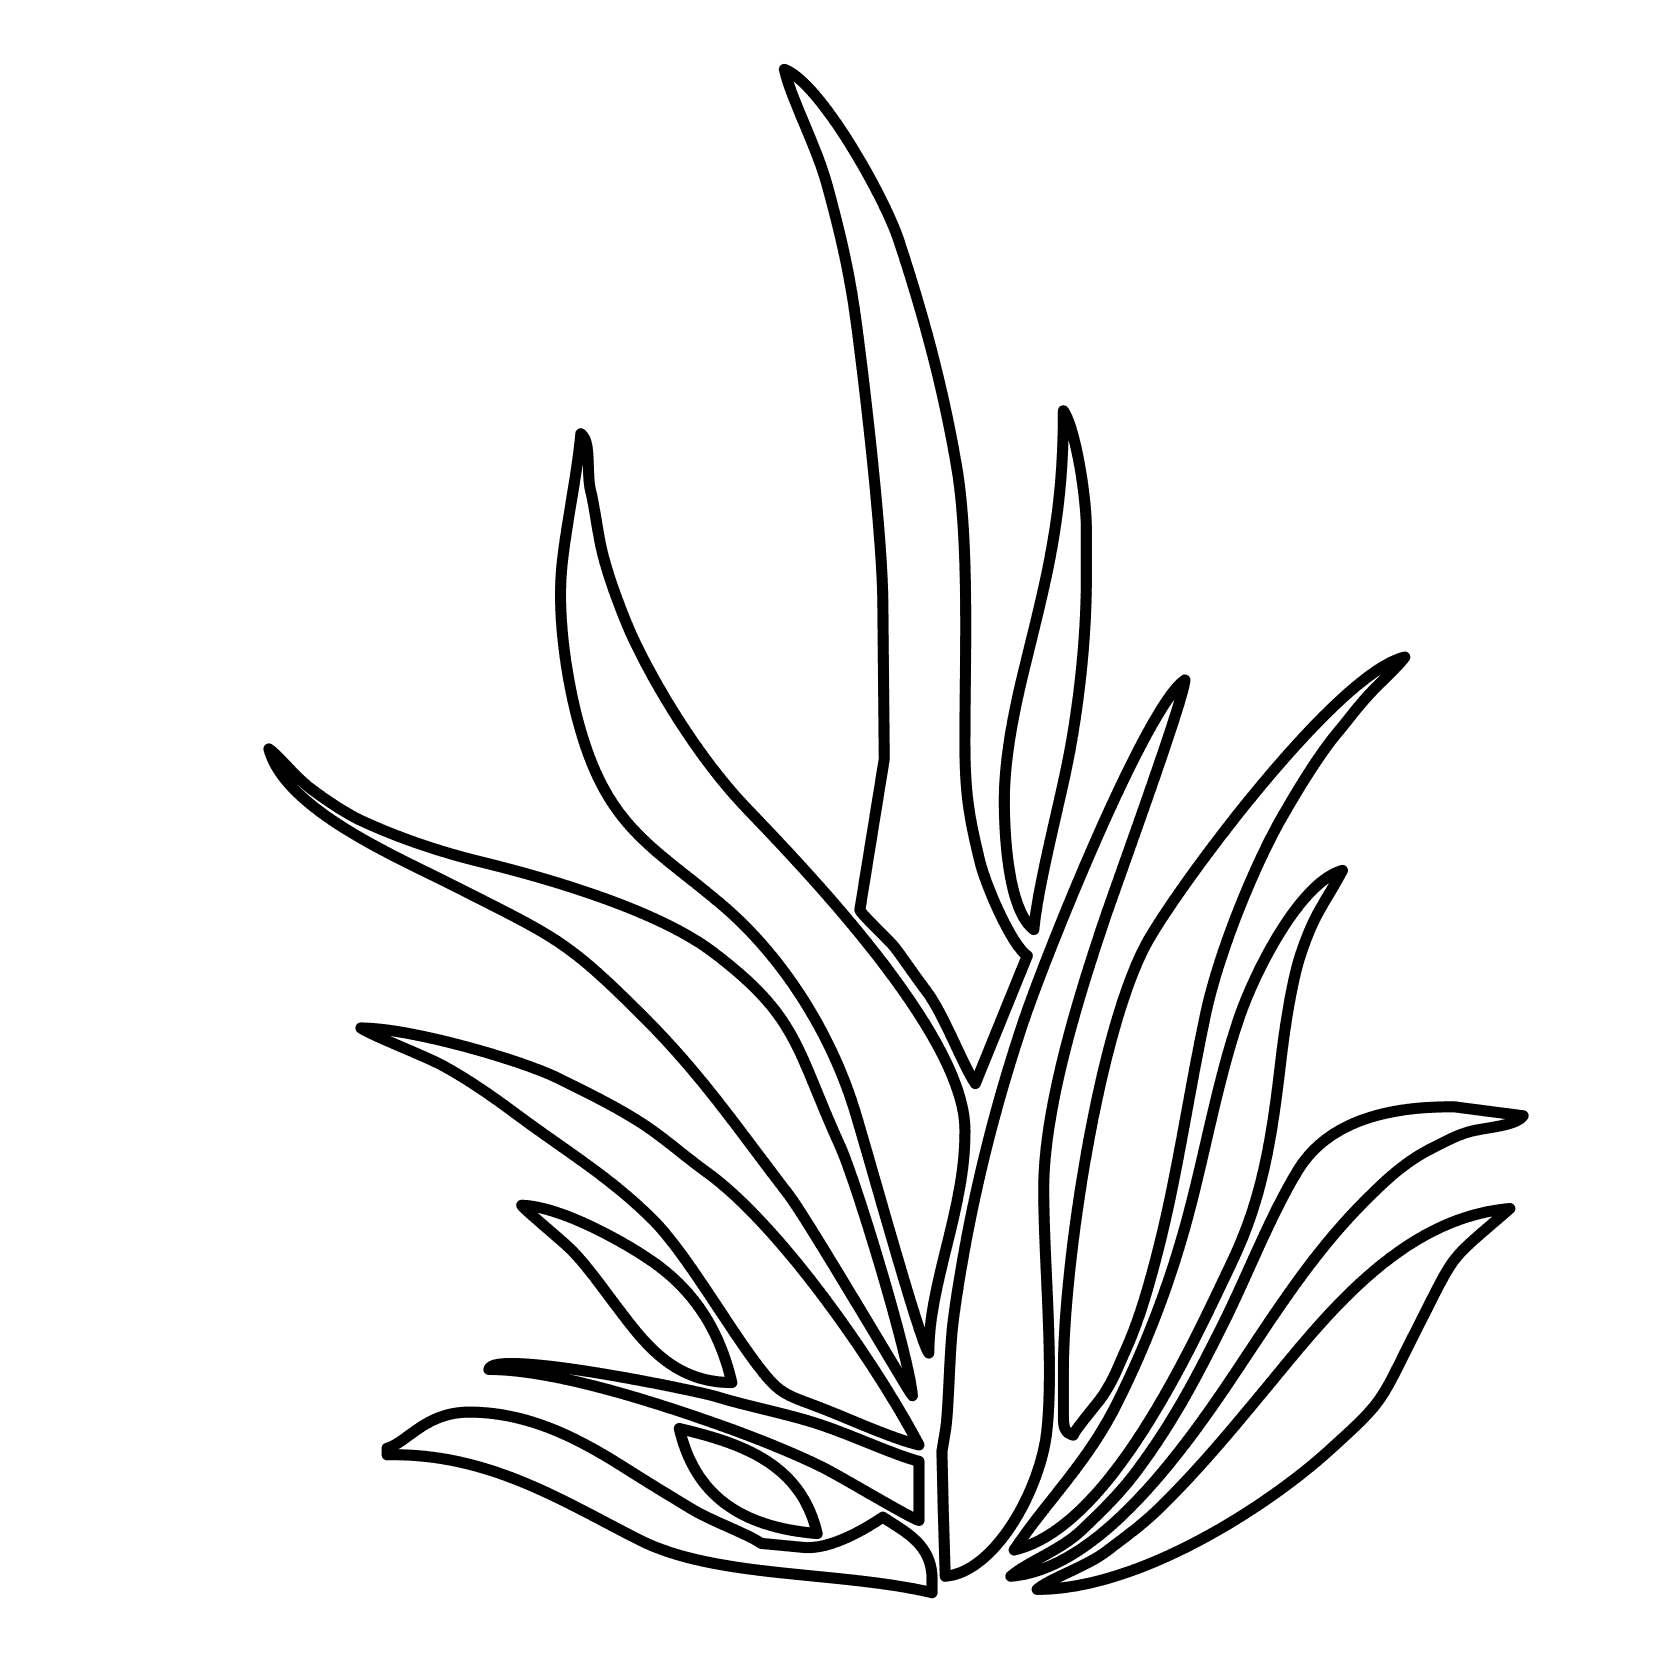 Coloring pages plants   free downloads